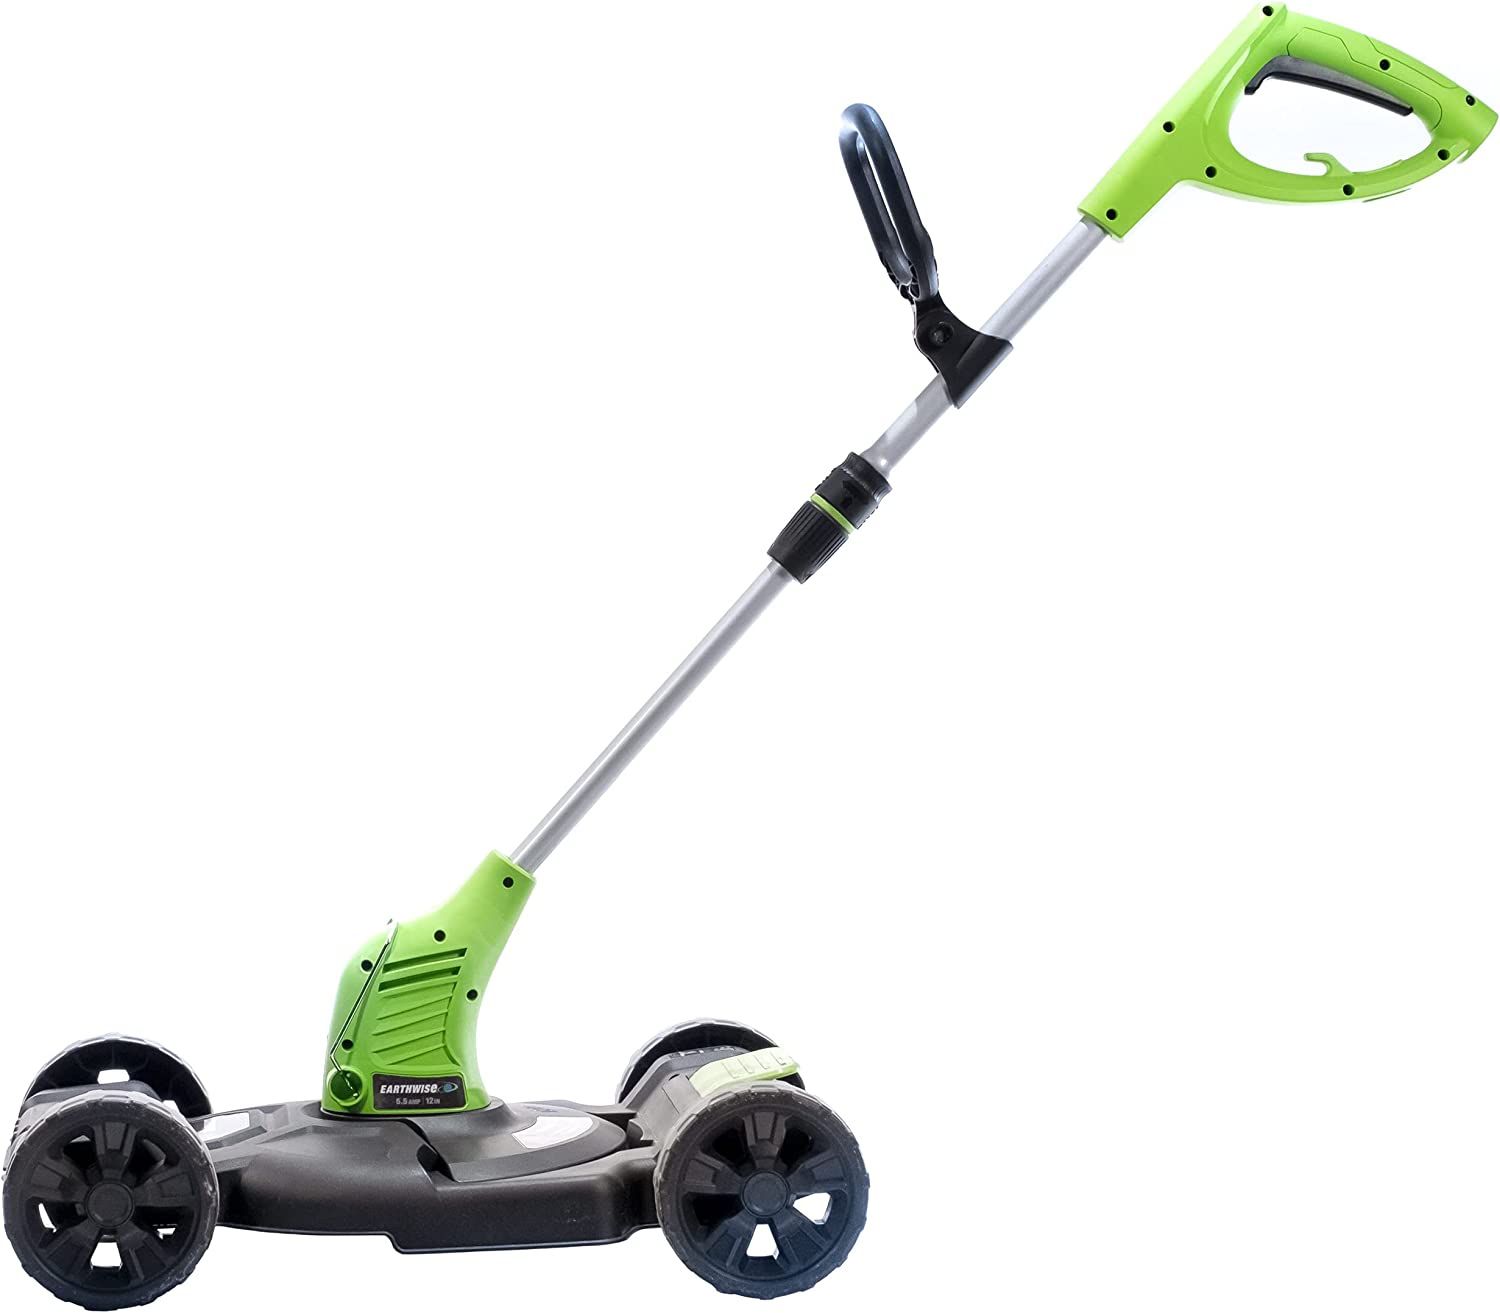 Eearthwise 5.5A 12" Corded String Trimmer/Mower Combo